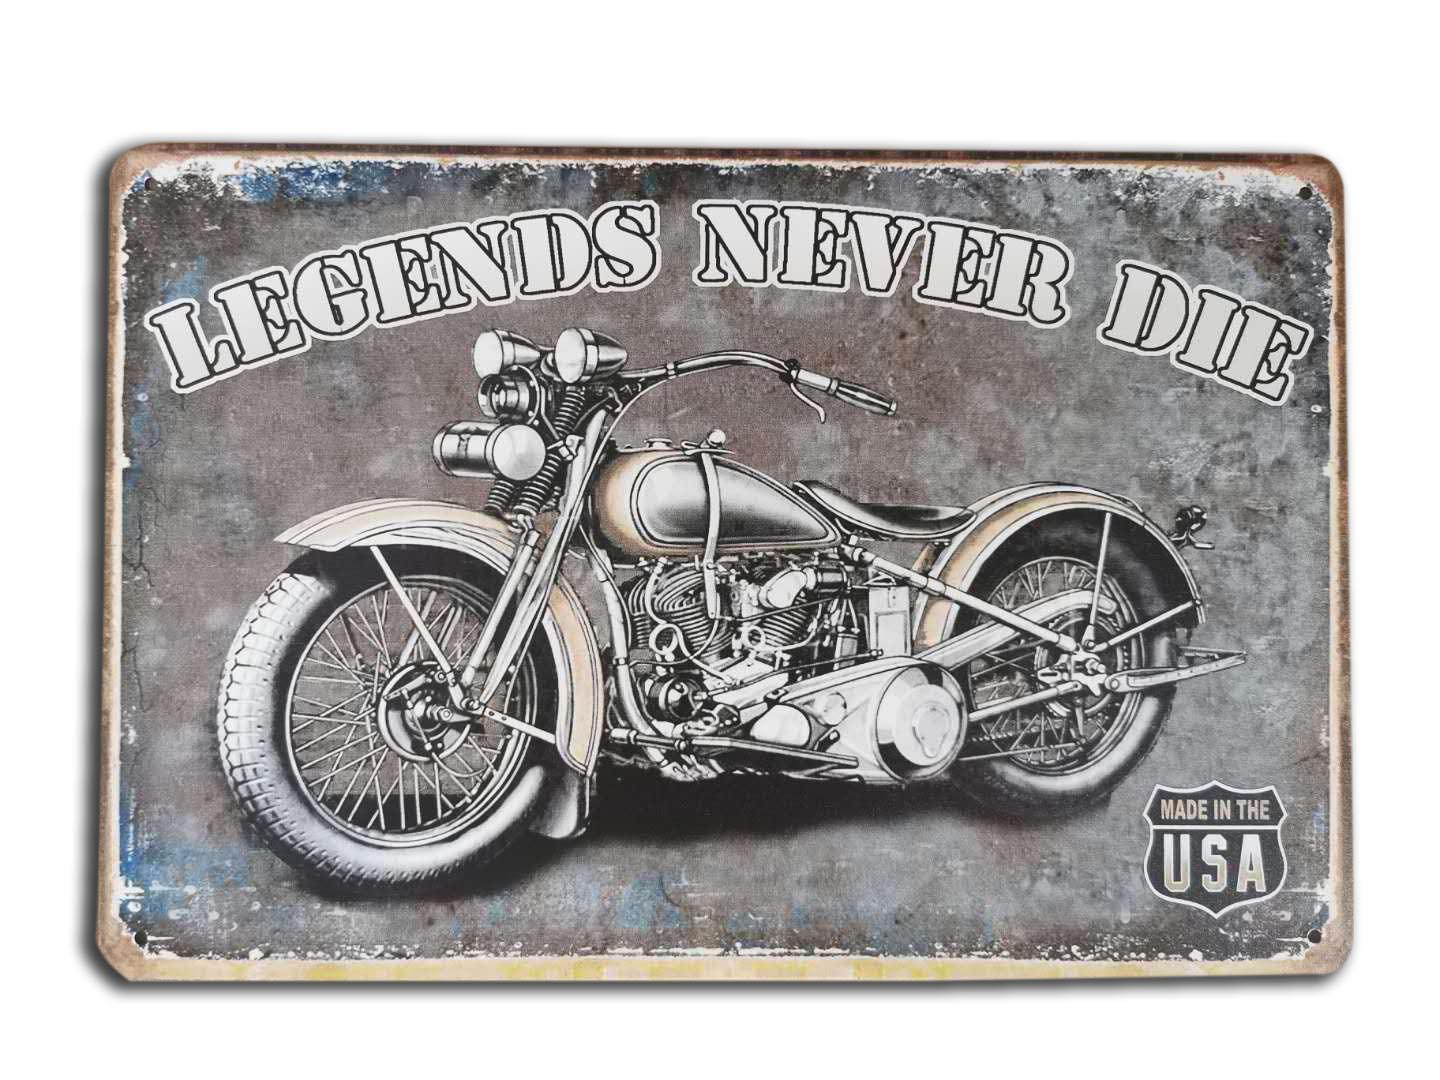 Made in the USA Legends Never Die Motorcycle Tin Sign 30cm x 20cm